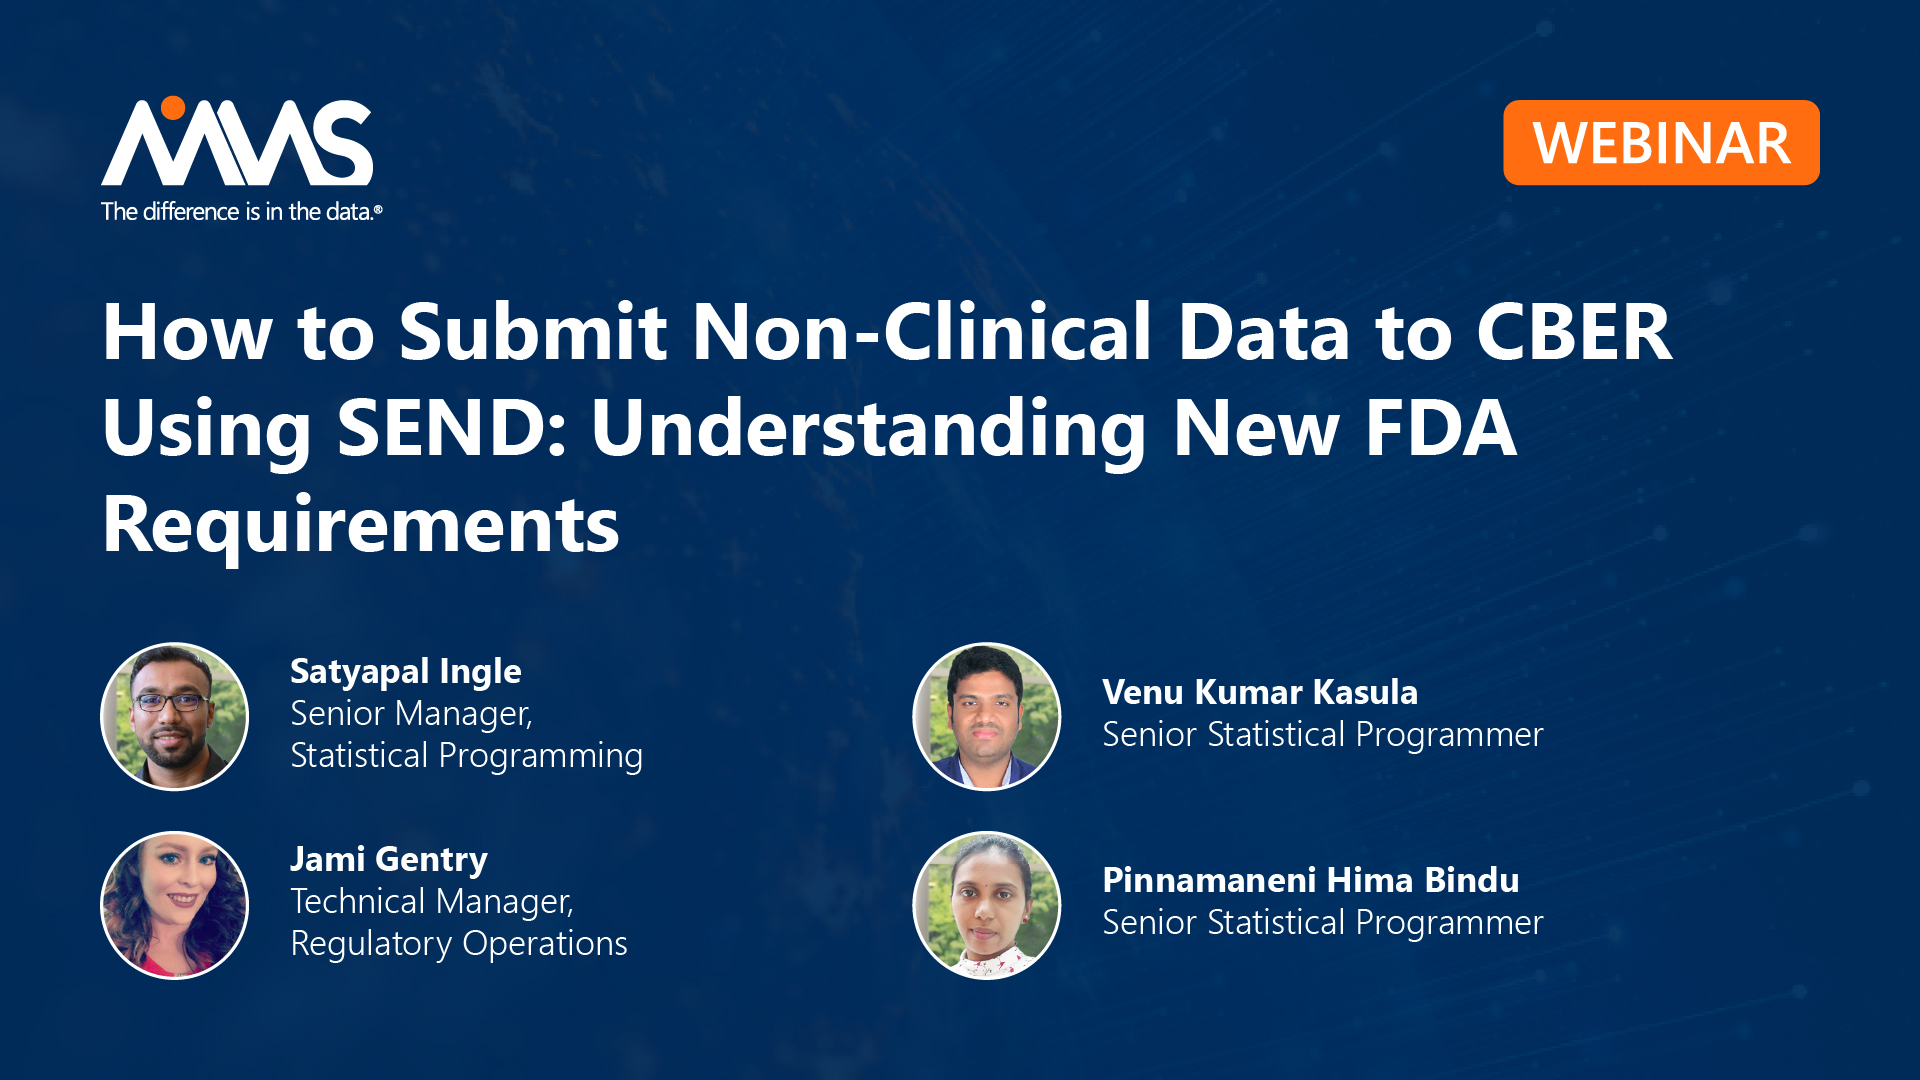 How to Submit Non-Clinical Data to CBER Using SEND : Understanding New FDA Requirements